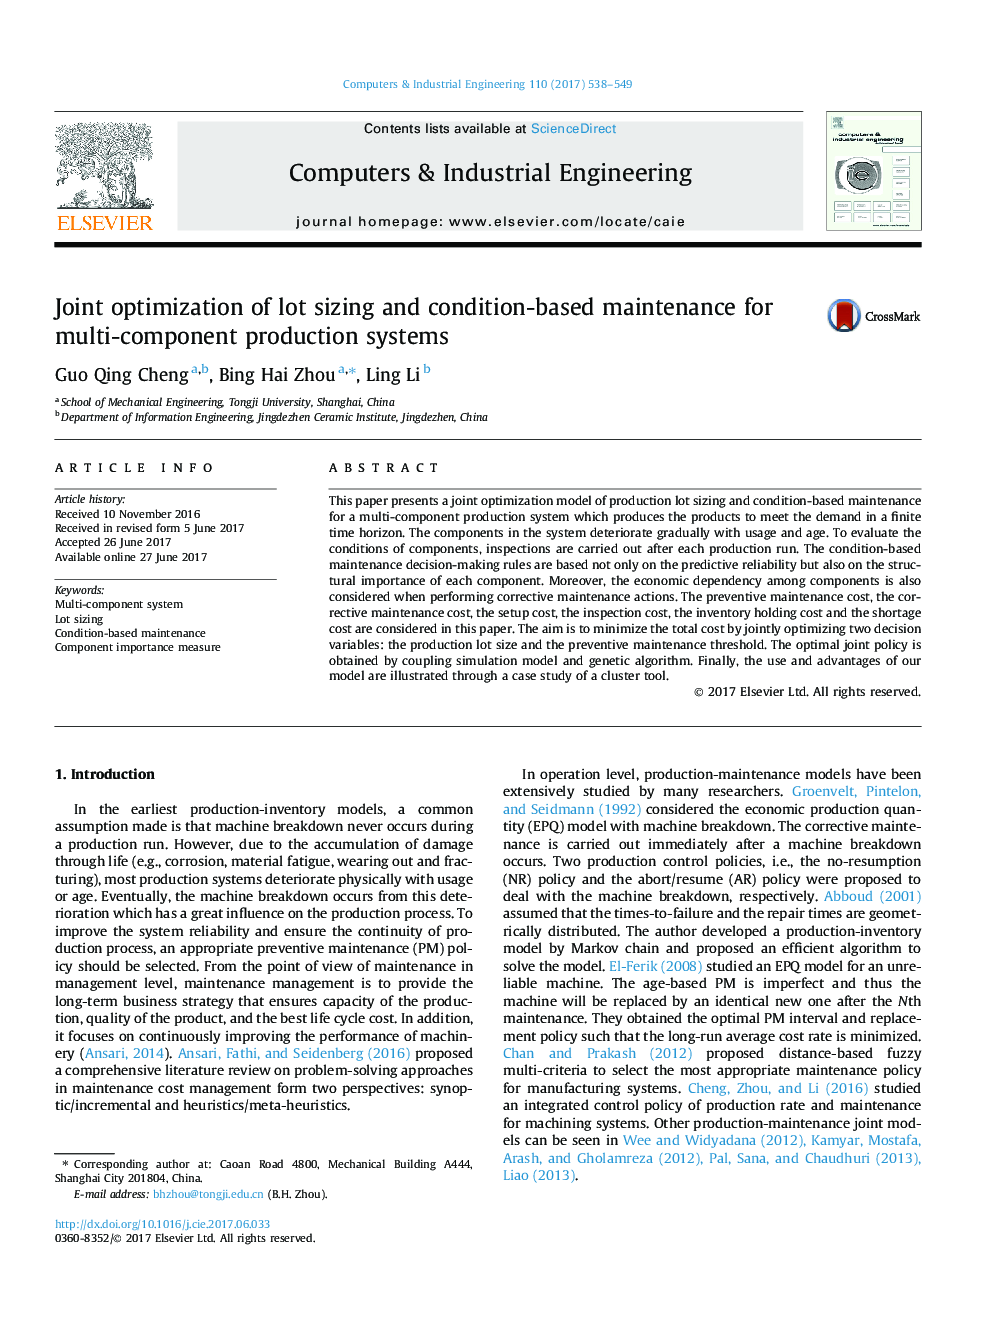 Joint optimization of lot sizing and condition-based maintenance for multi-component production systems